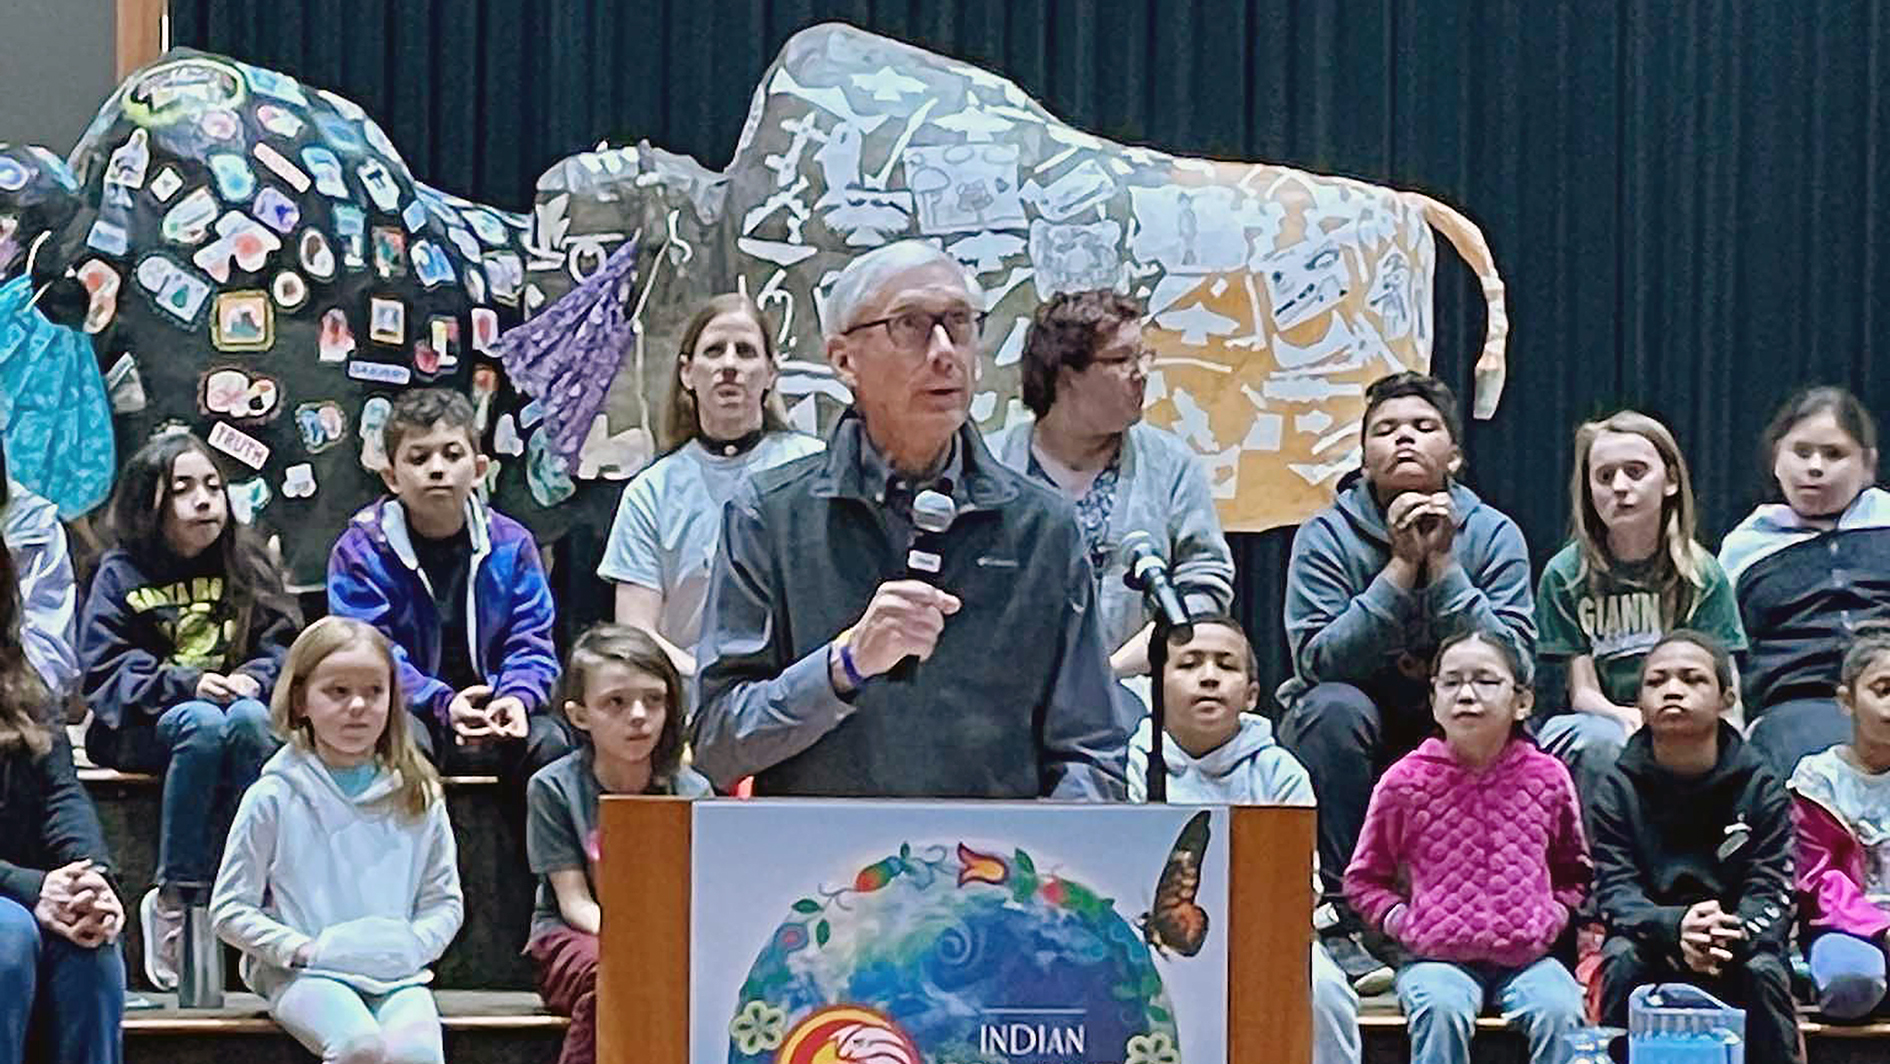 Wisconsin Gov Evers announced the creation of the Office of Environmental Justice on April 22, 2022 at the Indian Community School in Franklin.